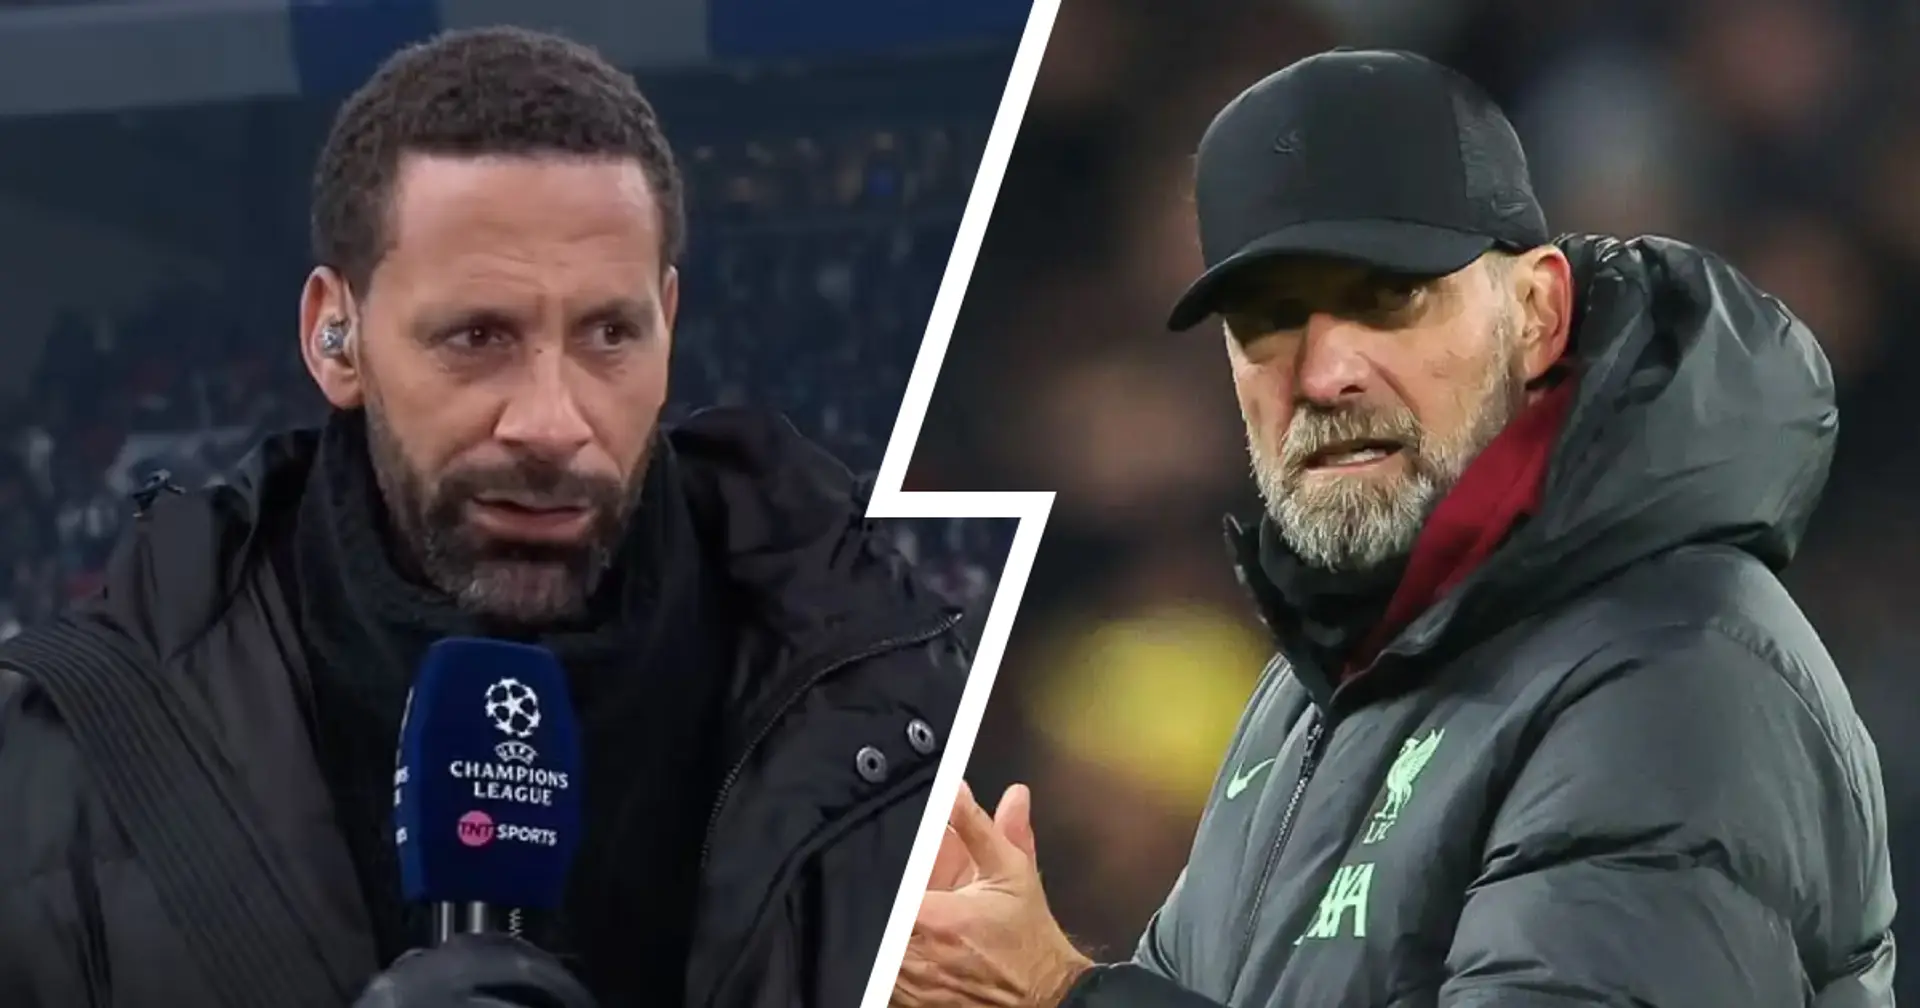 'I thought it was going to be Arsenal': Rio Ferdinand admits Liverpool surprised him by title challenge